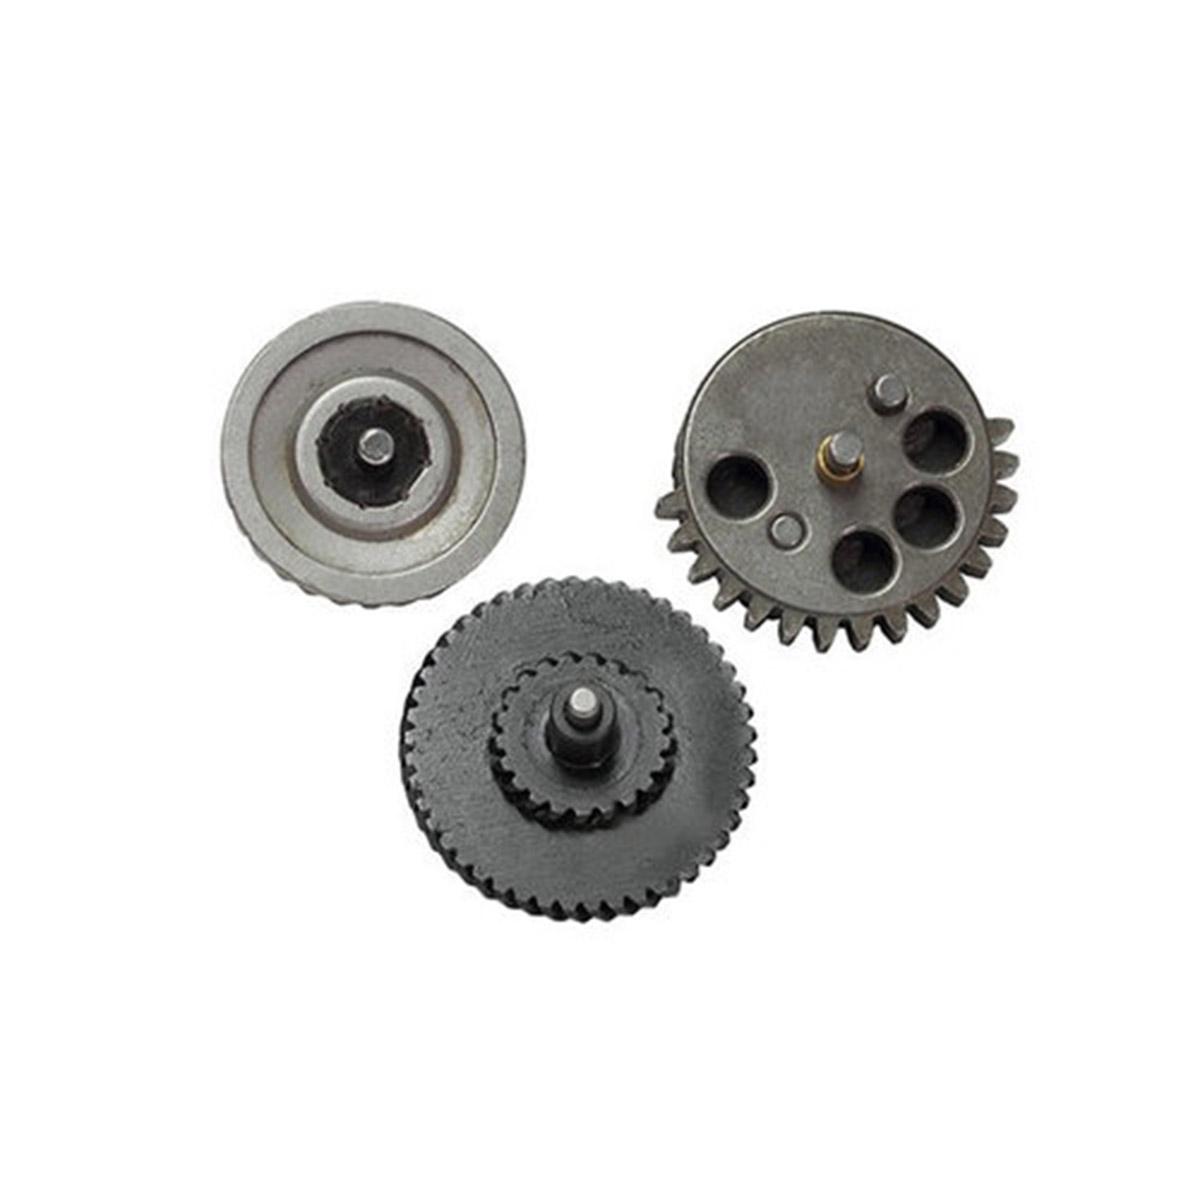 100:300 SHS Low Noise High Torque Gear Set for Gearbox V2/3 